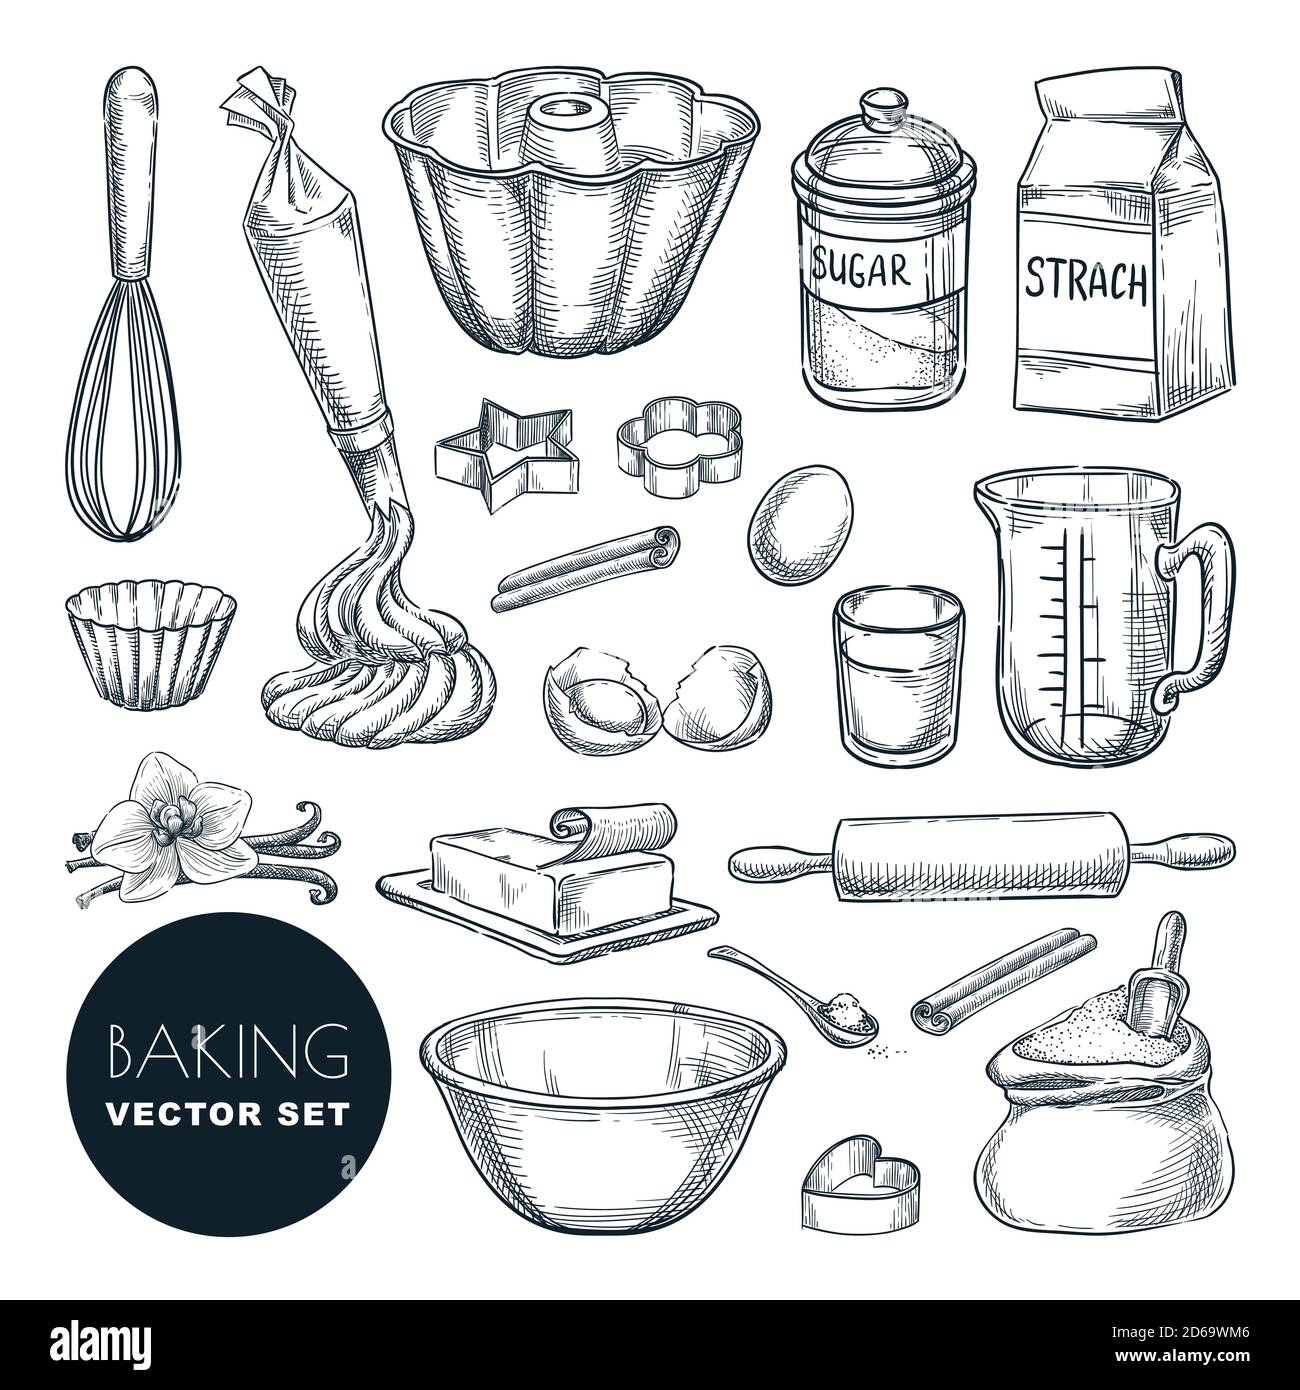 Baking tools and ingredients. Vector hand drawn sketch illustration. Cooking and recipe design elements set, isolated on white background. Kitchen ute Stock Vector